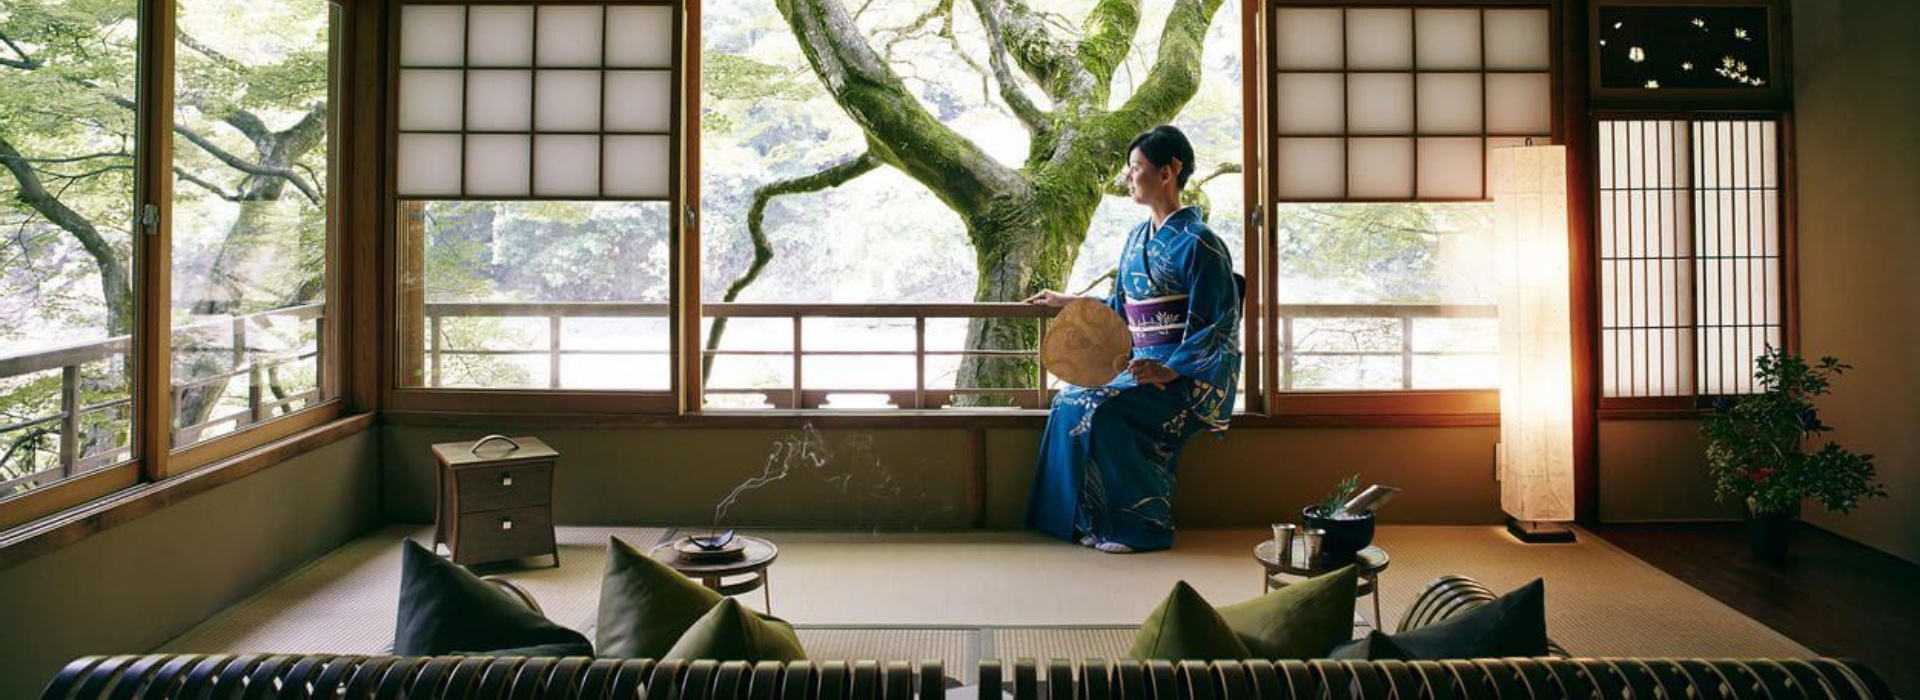 Japan's Most Fascinating Destination, The  Regal and Radiant Kyoto